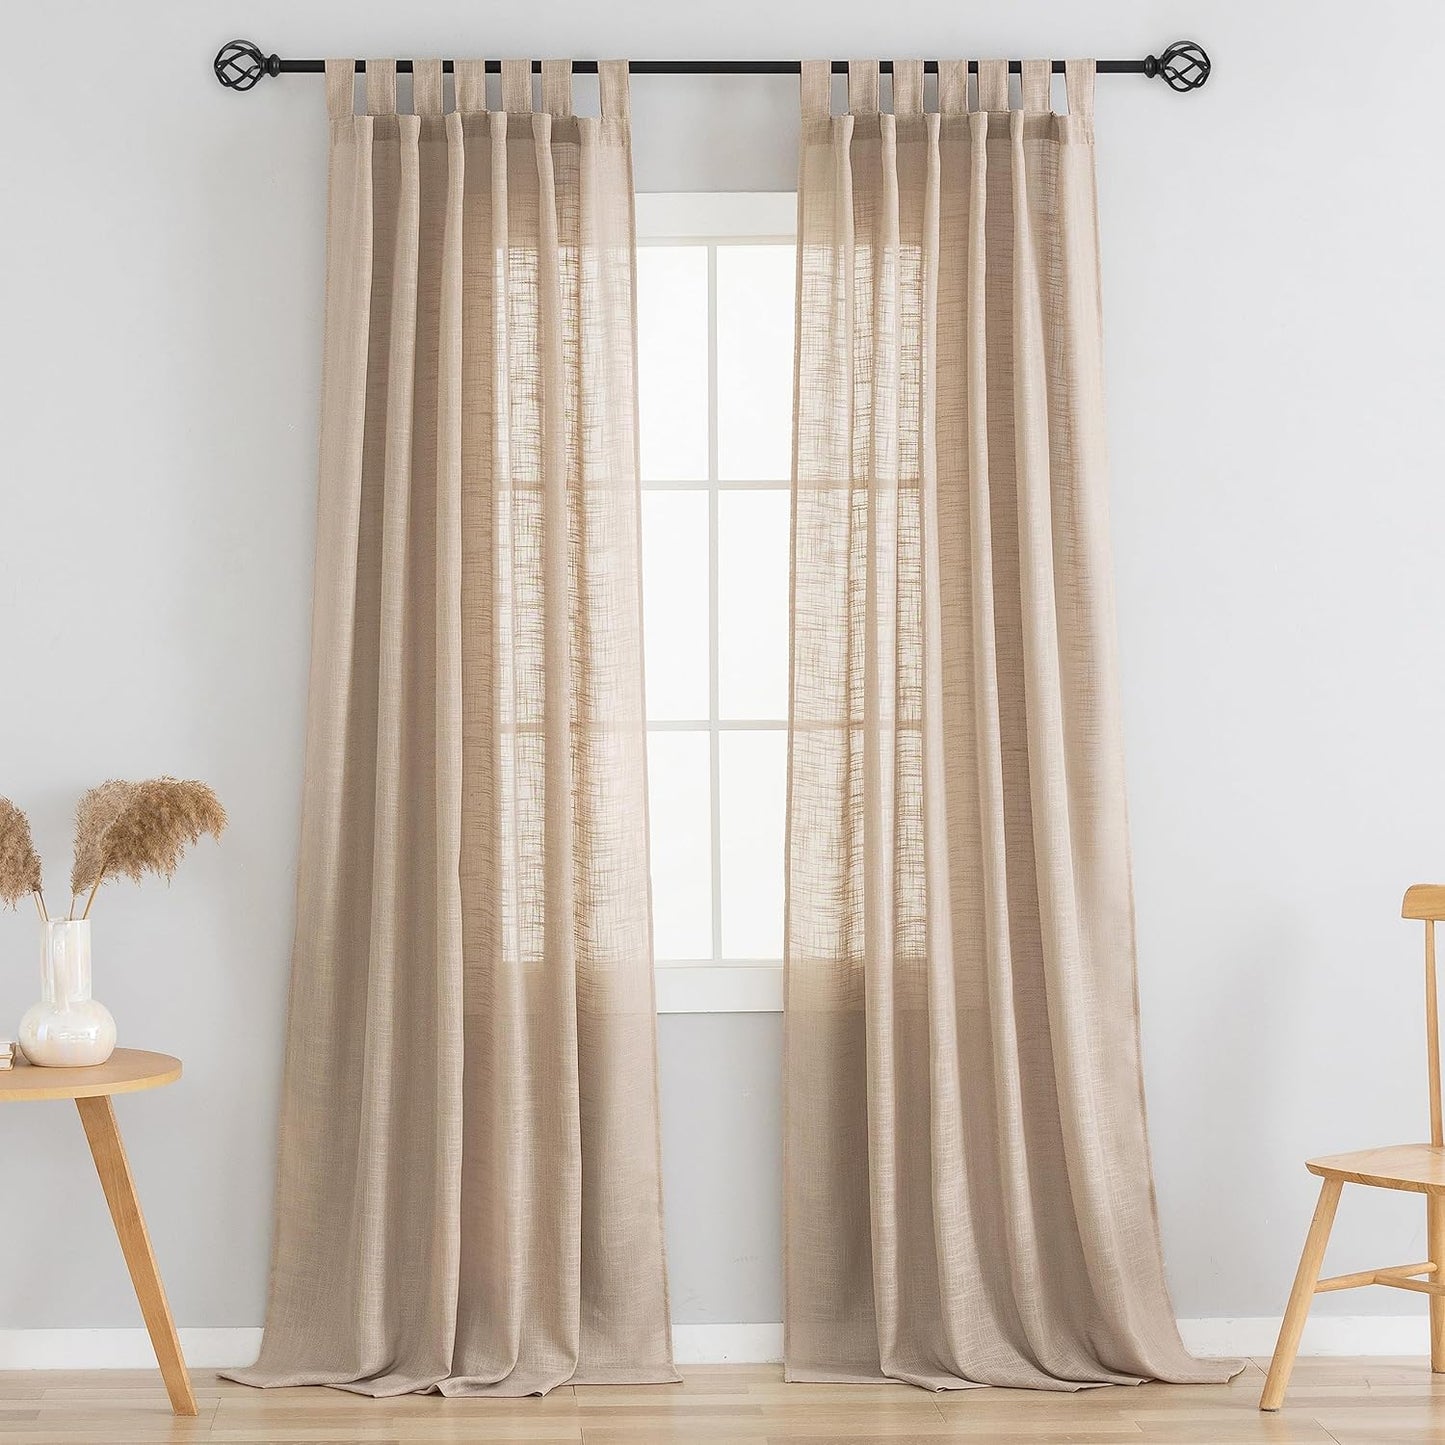 VOILYBIRD Natural Linen Semi Sheer Curtains Tab Top Light Filtering Elegant Curtains & Drapes for Living Room 52 X 84 Inch Length, Set of 2 Panels  VOILYBIRD Tan W52 X L96 